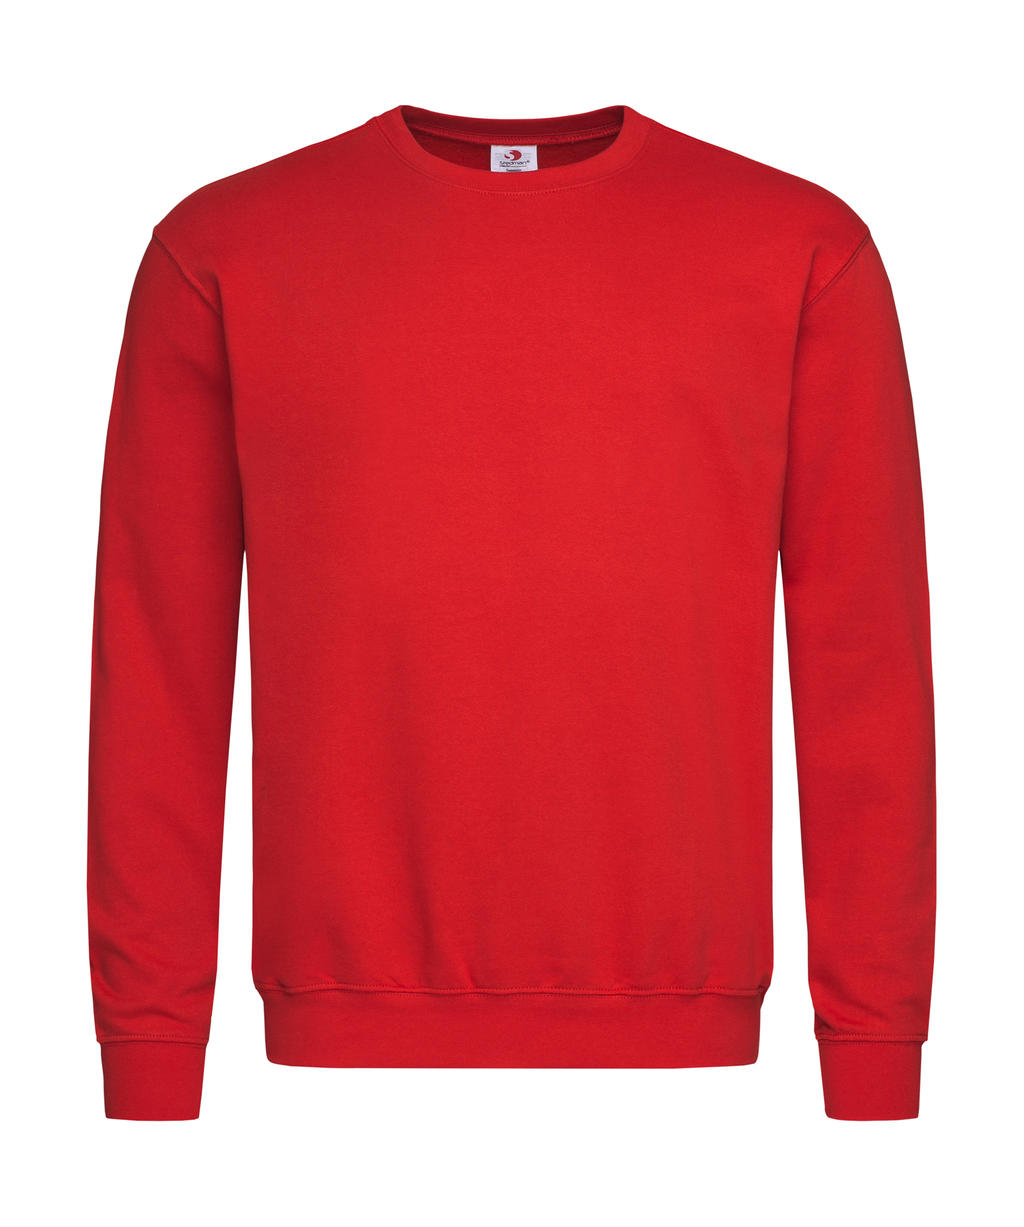  Unisex Sweatshirt Classic in Farbe Scarlet Red